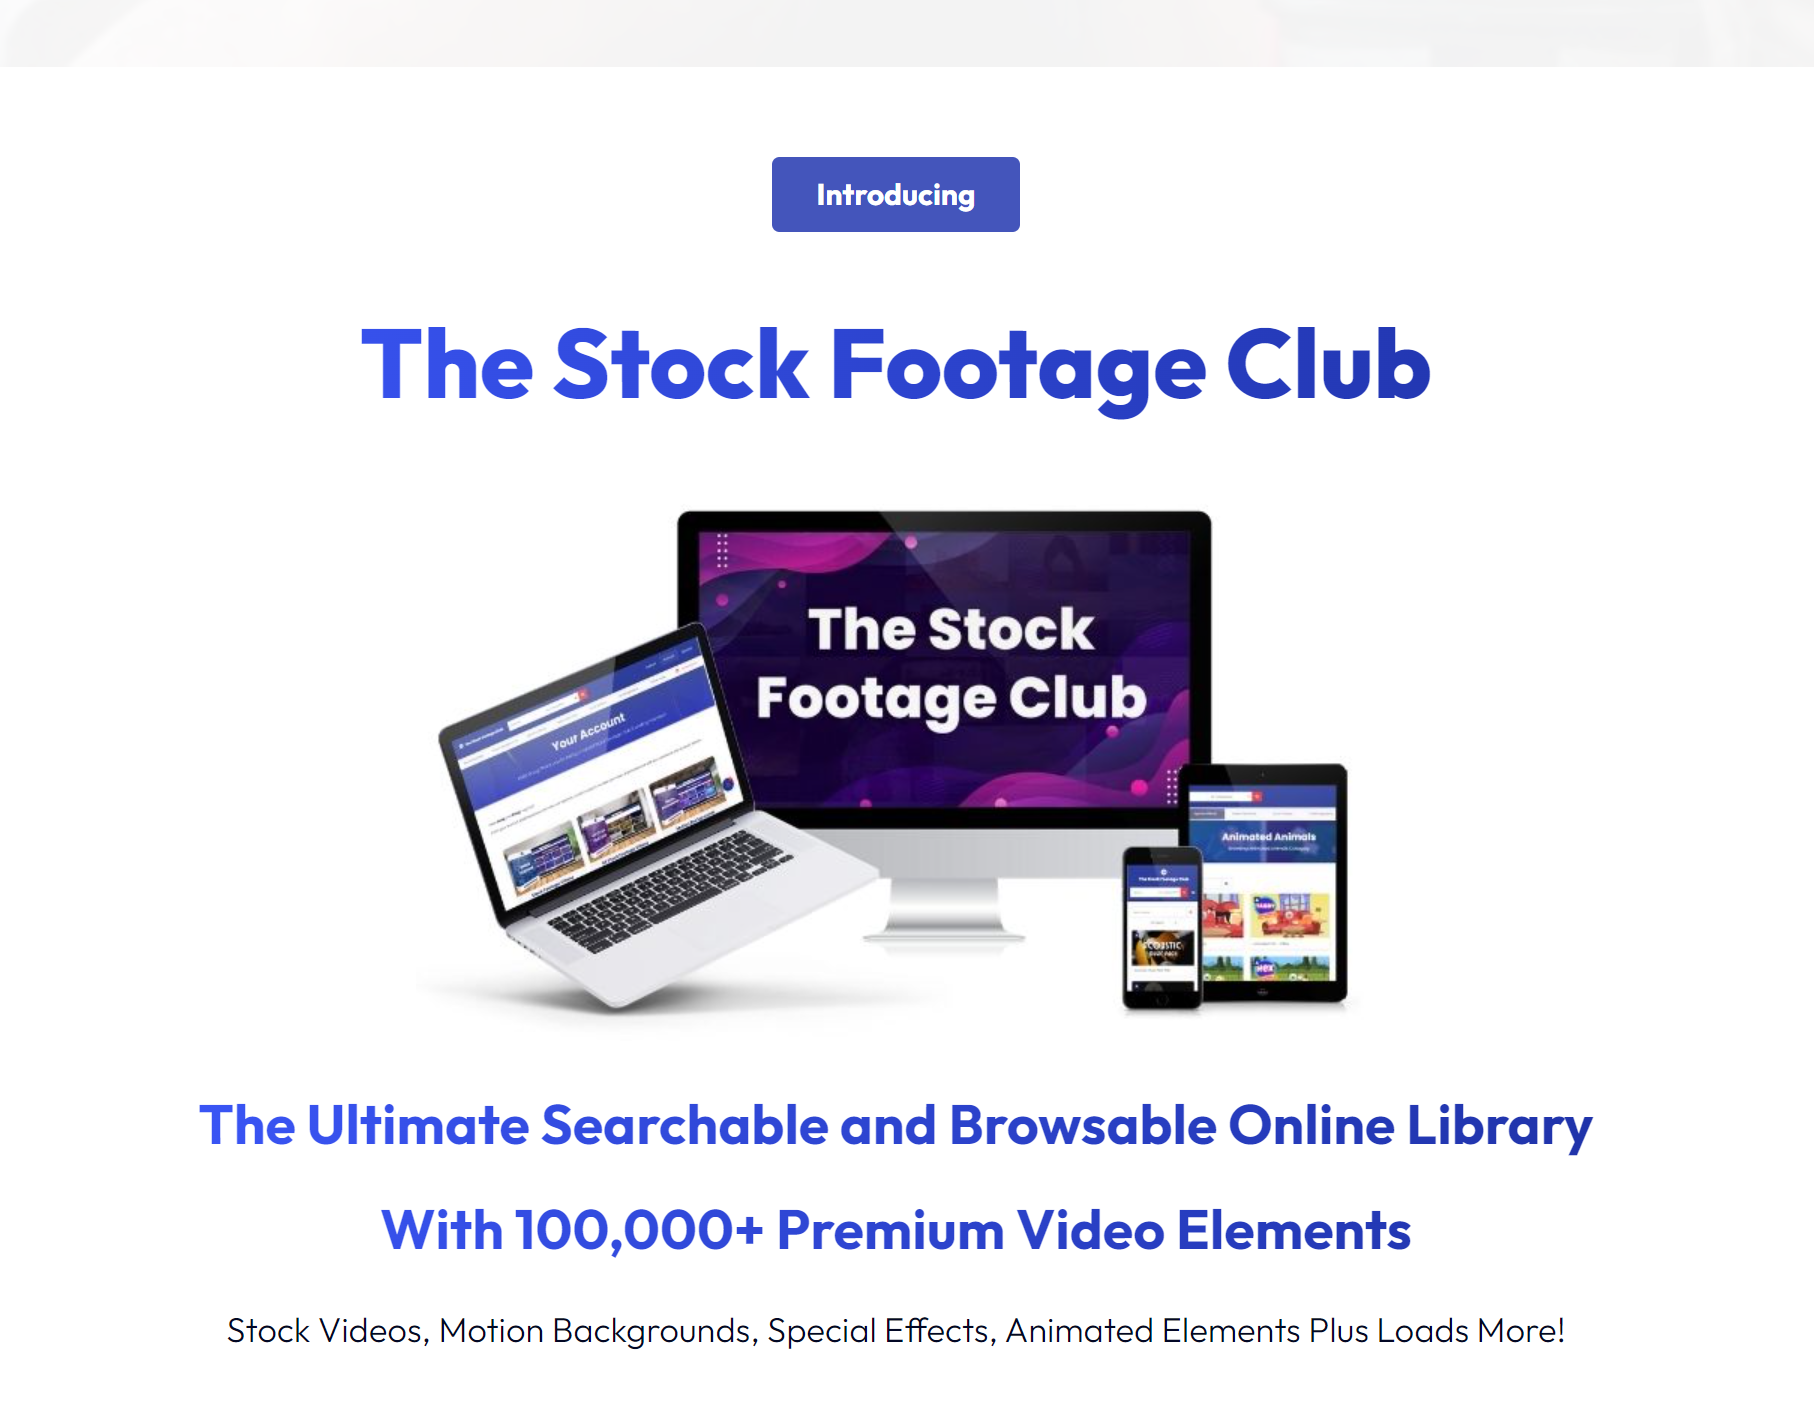 The Stock Footage Club Special Discount Unlimited Video Elements 1 The Stock Footage Club Gives You Access To Unlimited Access To 100,000+ Premium Stock Videos and Video Elements - What Is Inside. Is It Worth Buying?